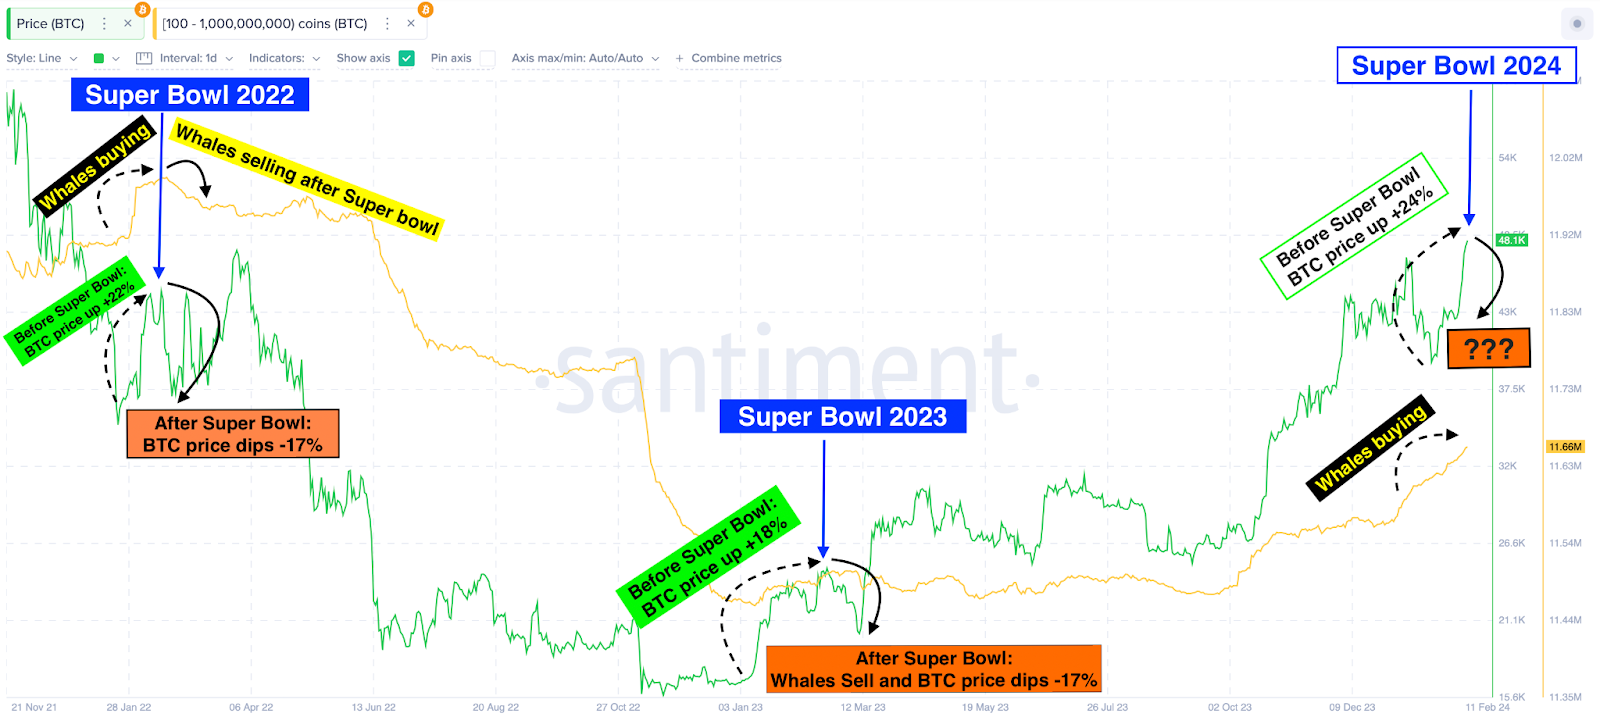 Bitcoin (BTC) price trend during and after the 2022-2024 Super Bowl period